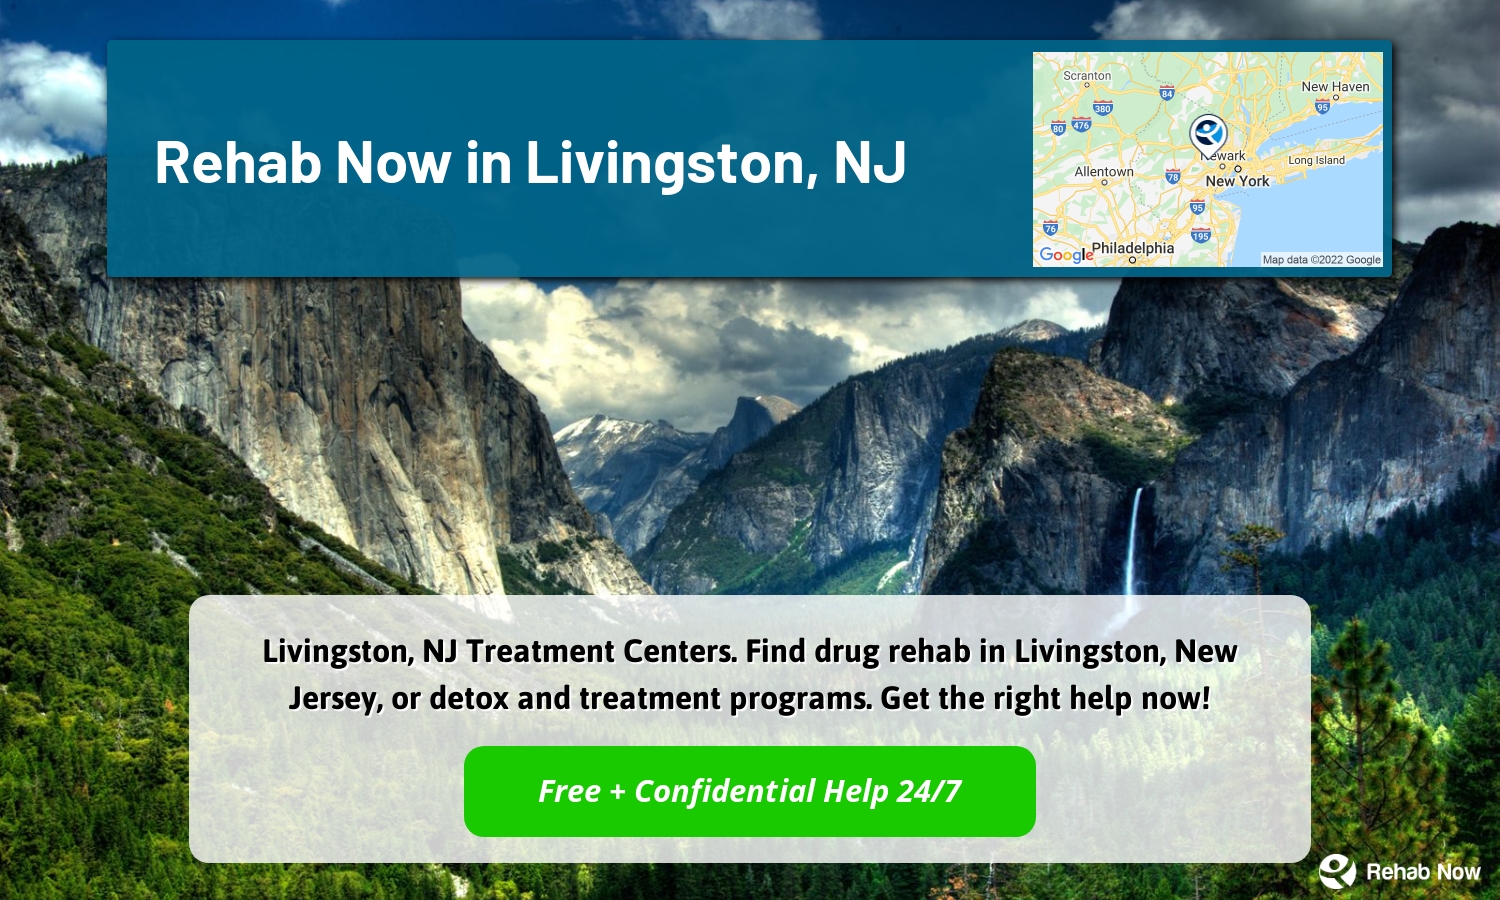 Livingston, NJ Treatment Centers. Find drug rehab in Livingston, New Jersey, or detox and treatment programs. Get the right help now!